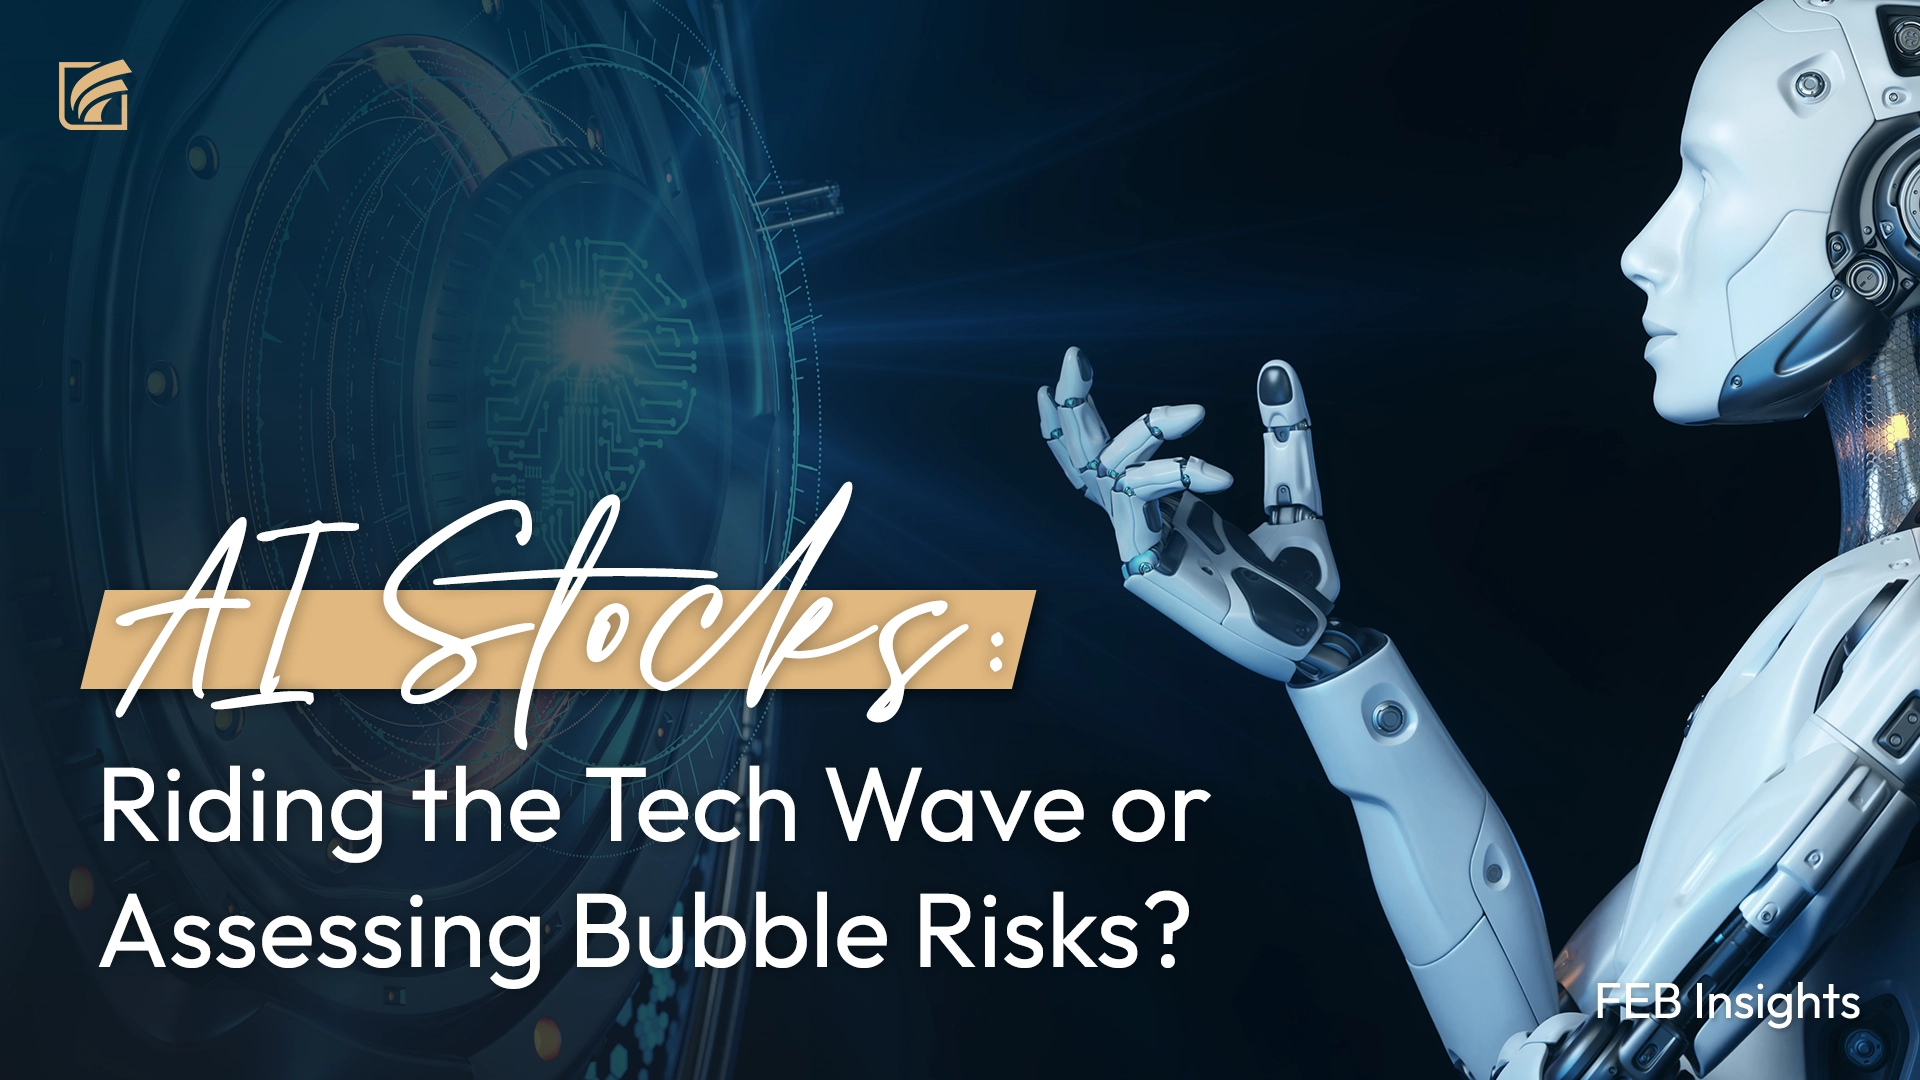 AI Stocks: Riding the Tech Wave or Assessing Bubble Risks?